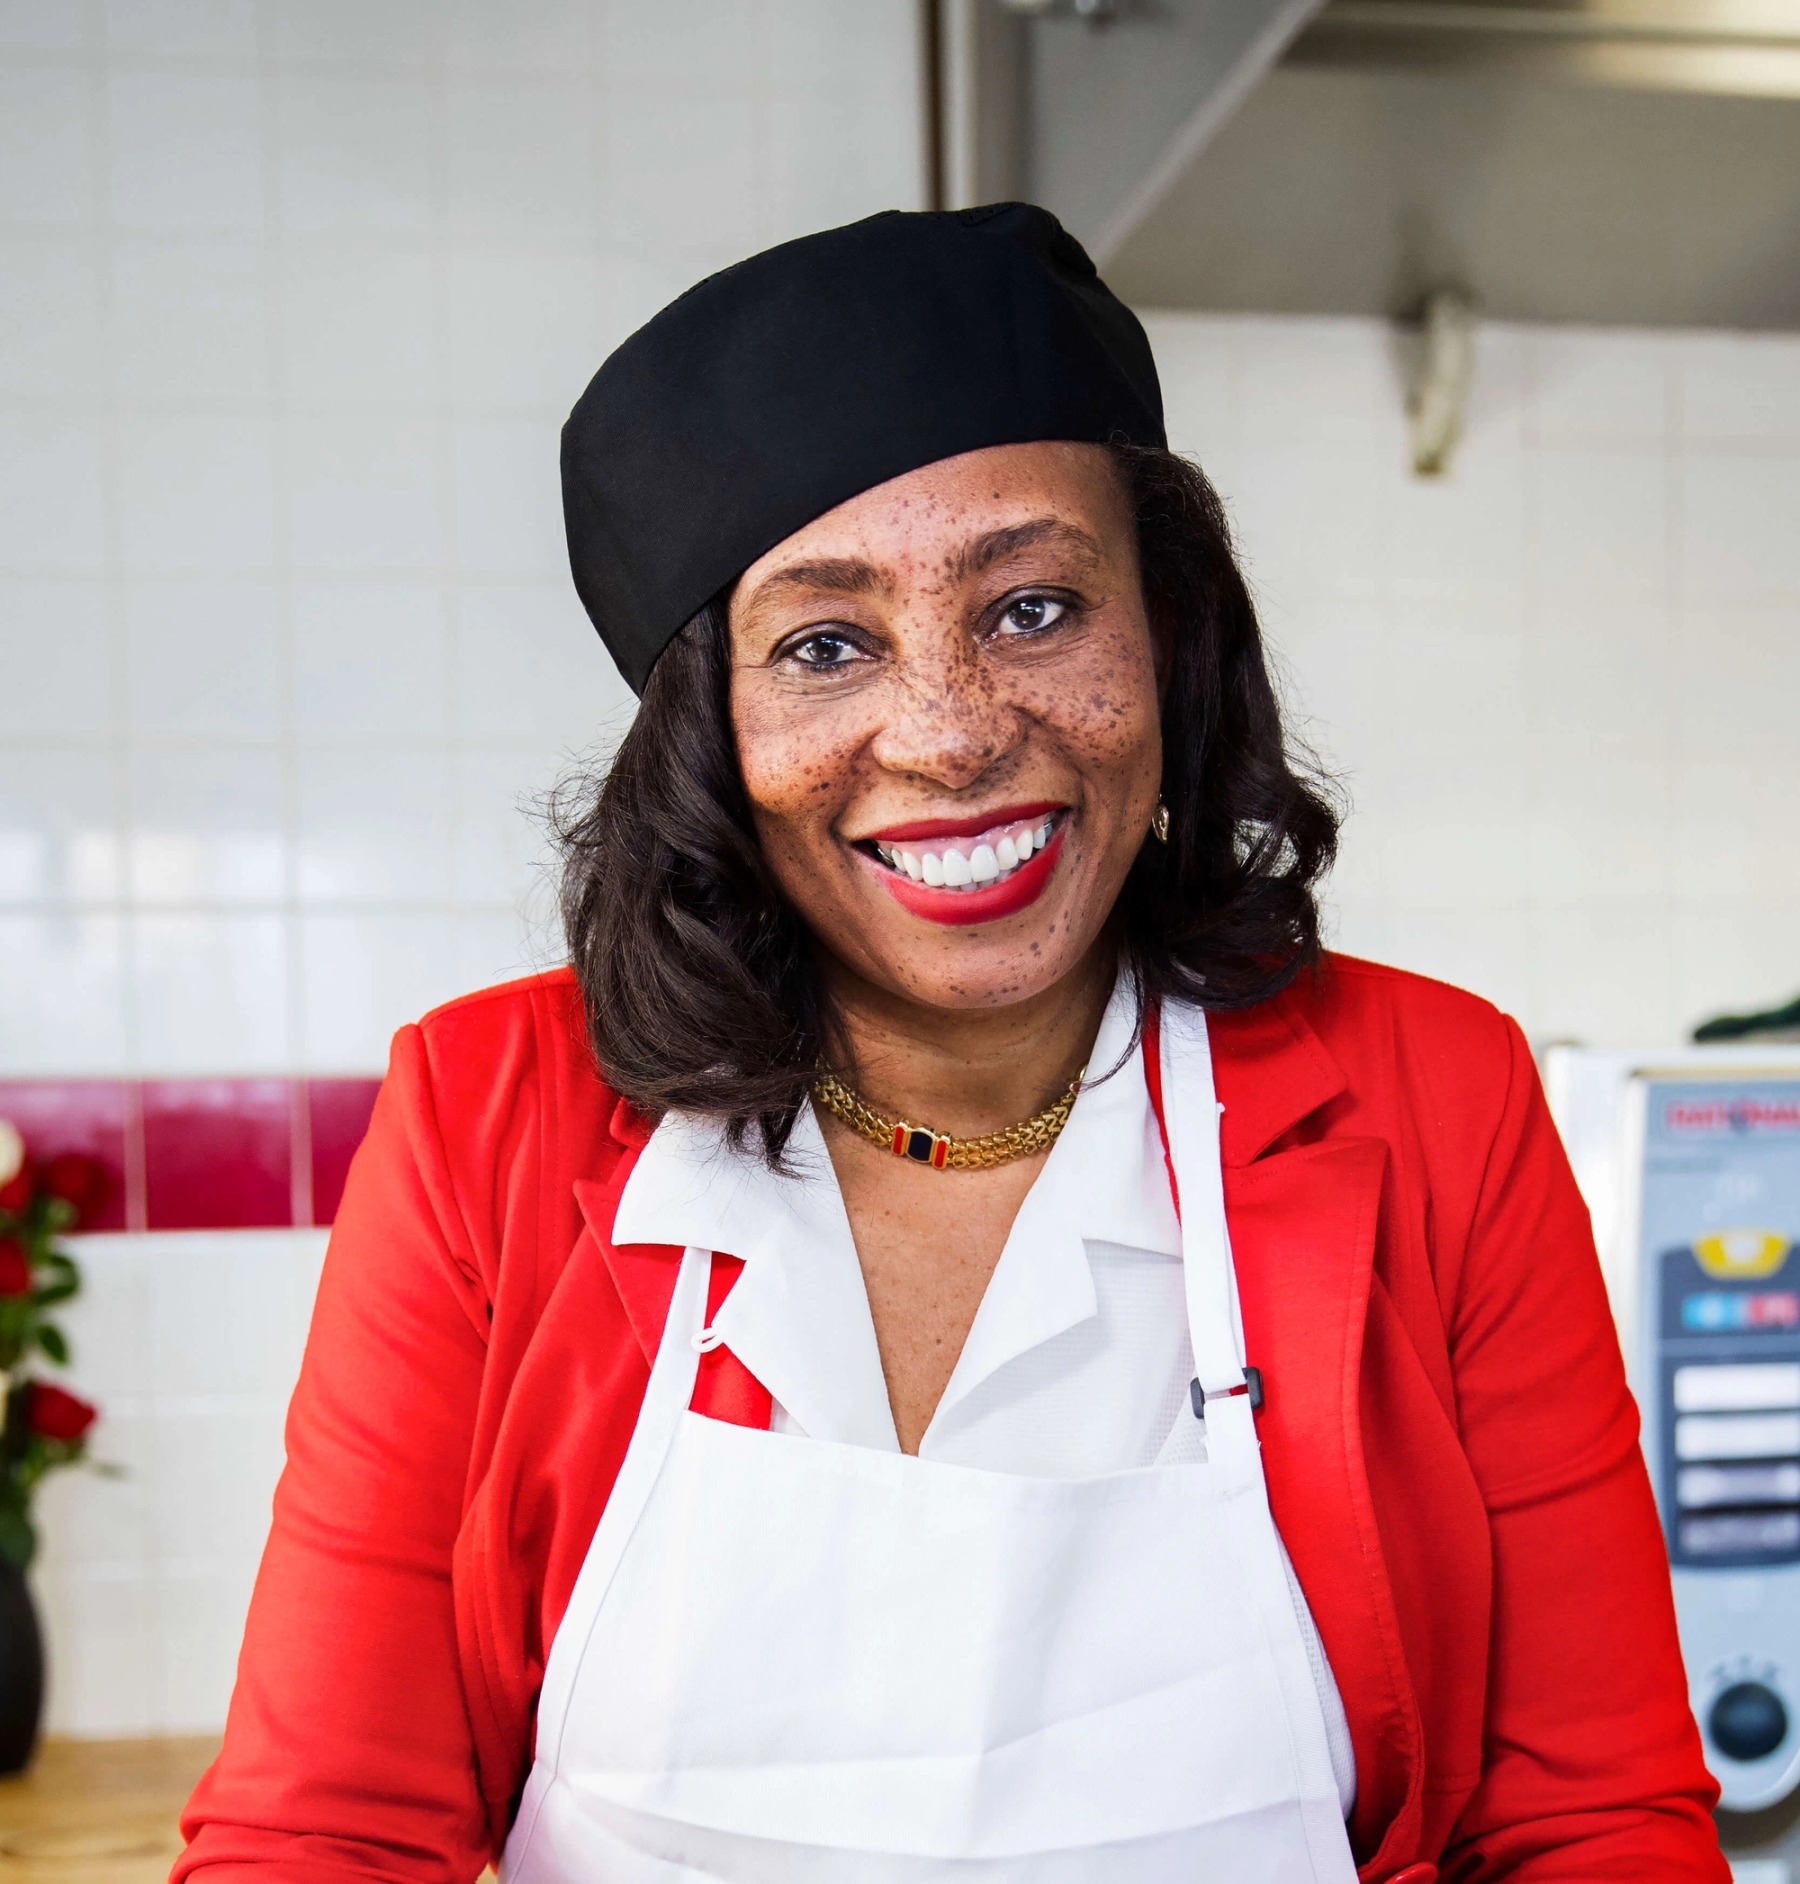 Head and shoulders portrait of a black woman with brown hair, wearing a black baker's hat and white apron, smiling and looking at the camera.